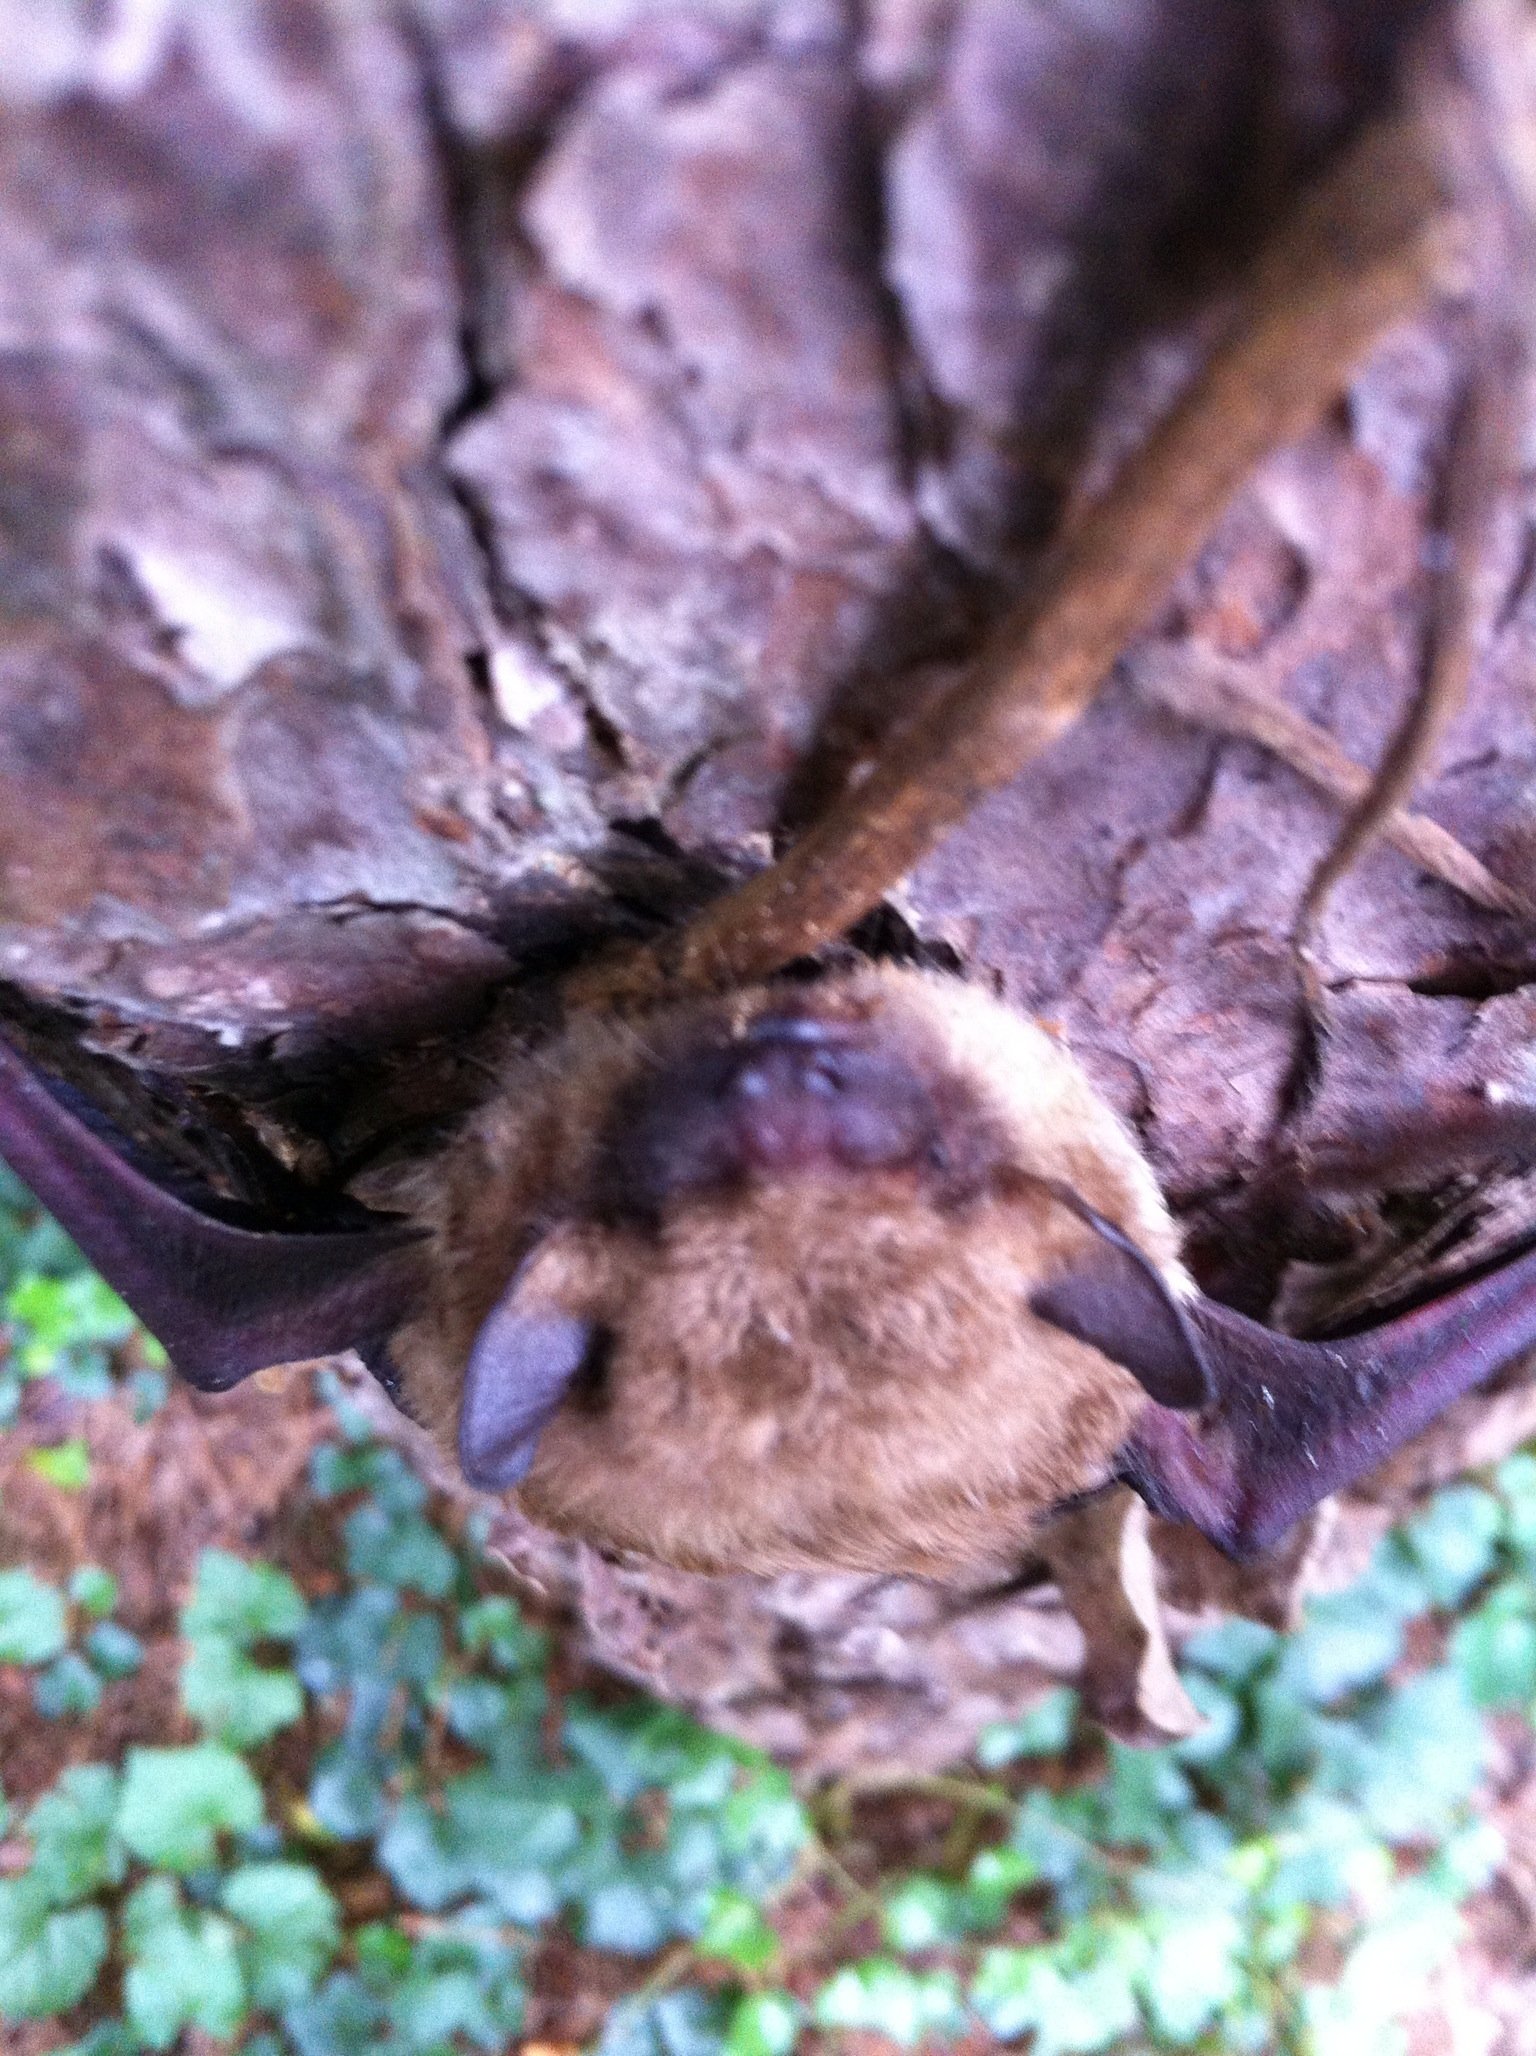 Brown Bat removal from an home in Alpharetta